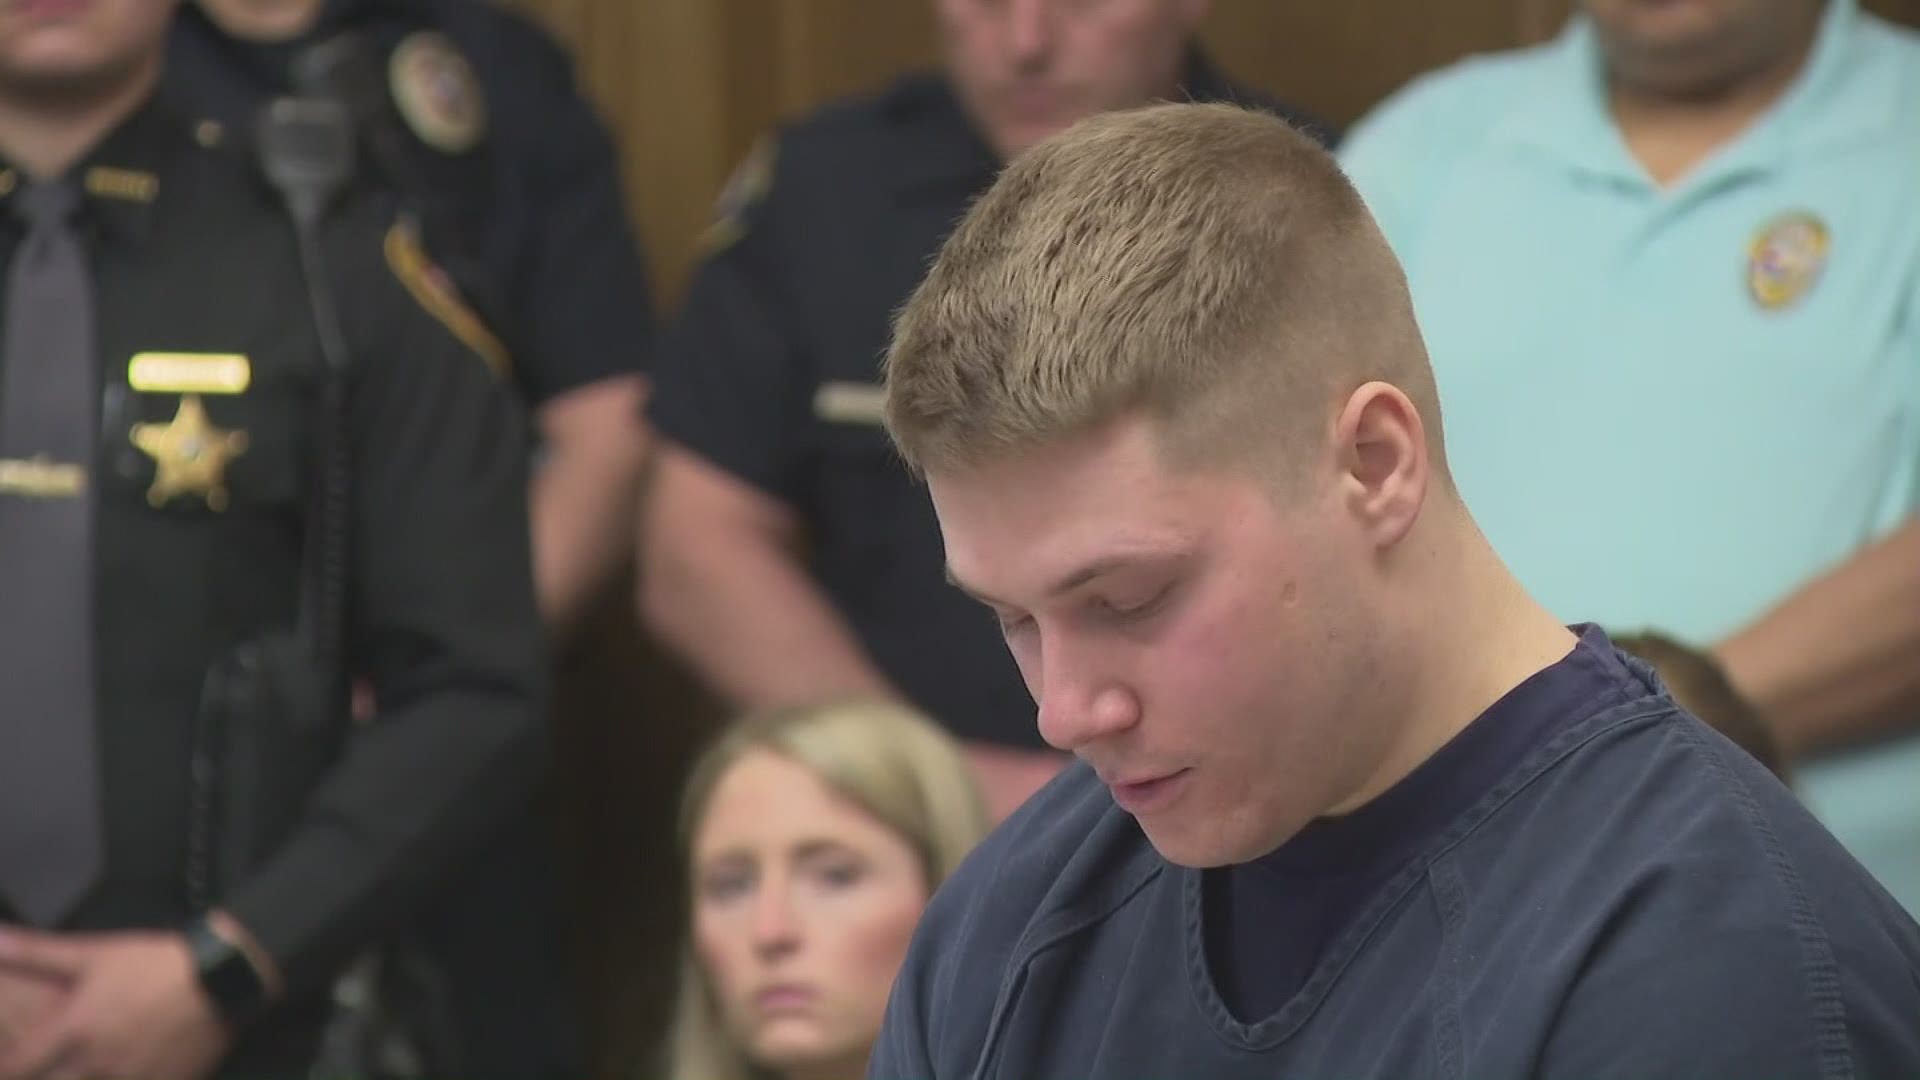 April 12, 2019: Brian Anthony offered a statement at his sentencing hearing in which he apologized for his actions that caused the death of Mentor police officer Mathew Mazany.